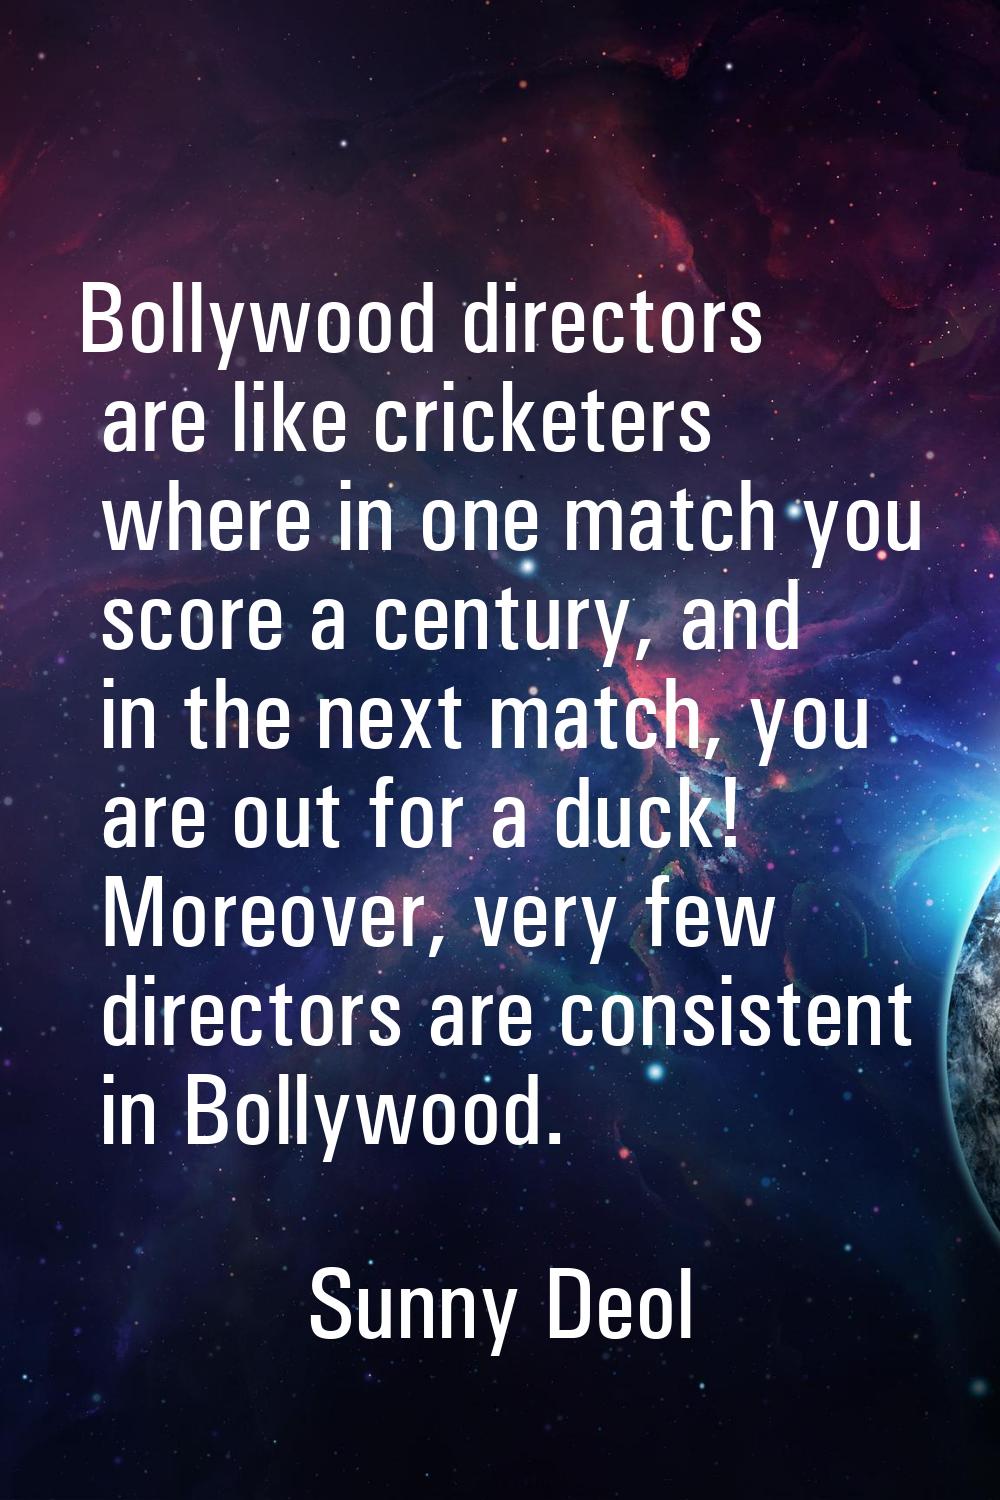 Bollywood directors are like cricketers where in one match you score a century, and in the next mat